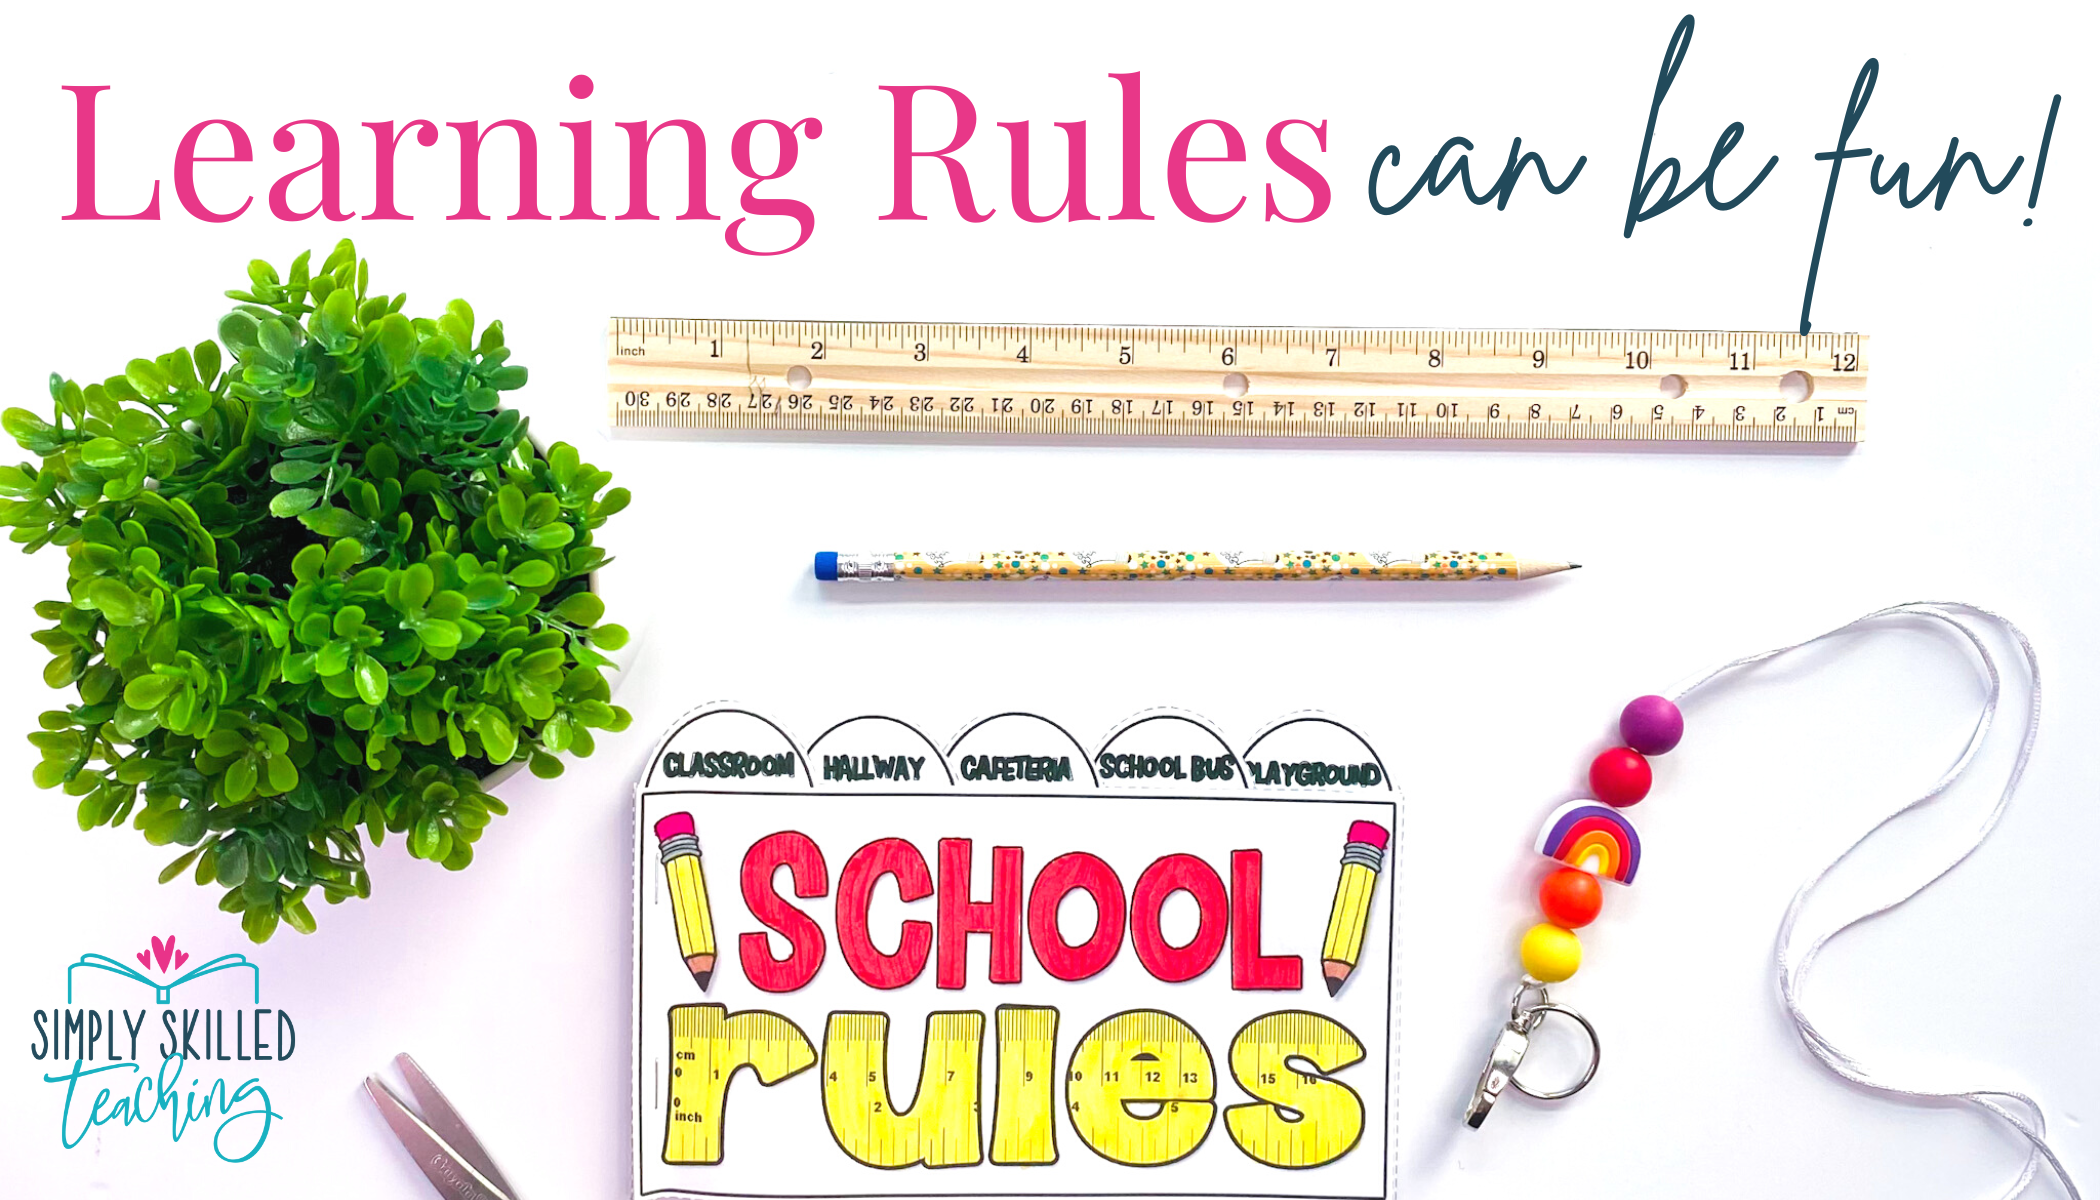 School Rules fun Featured Blog Image